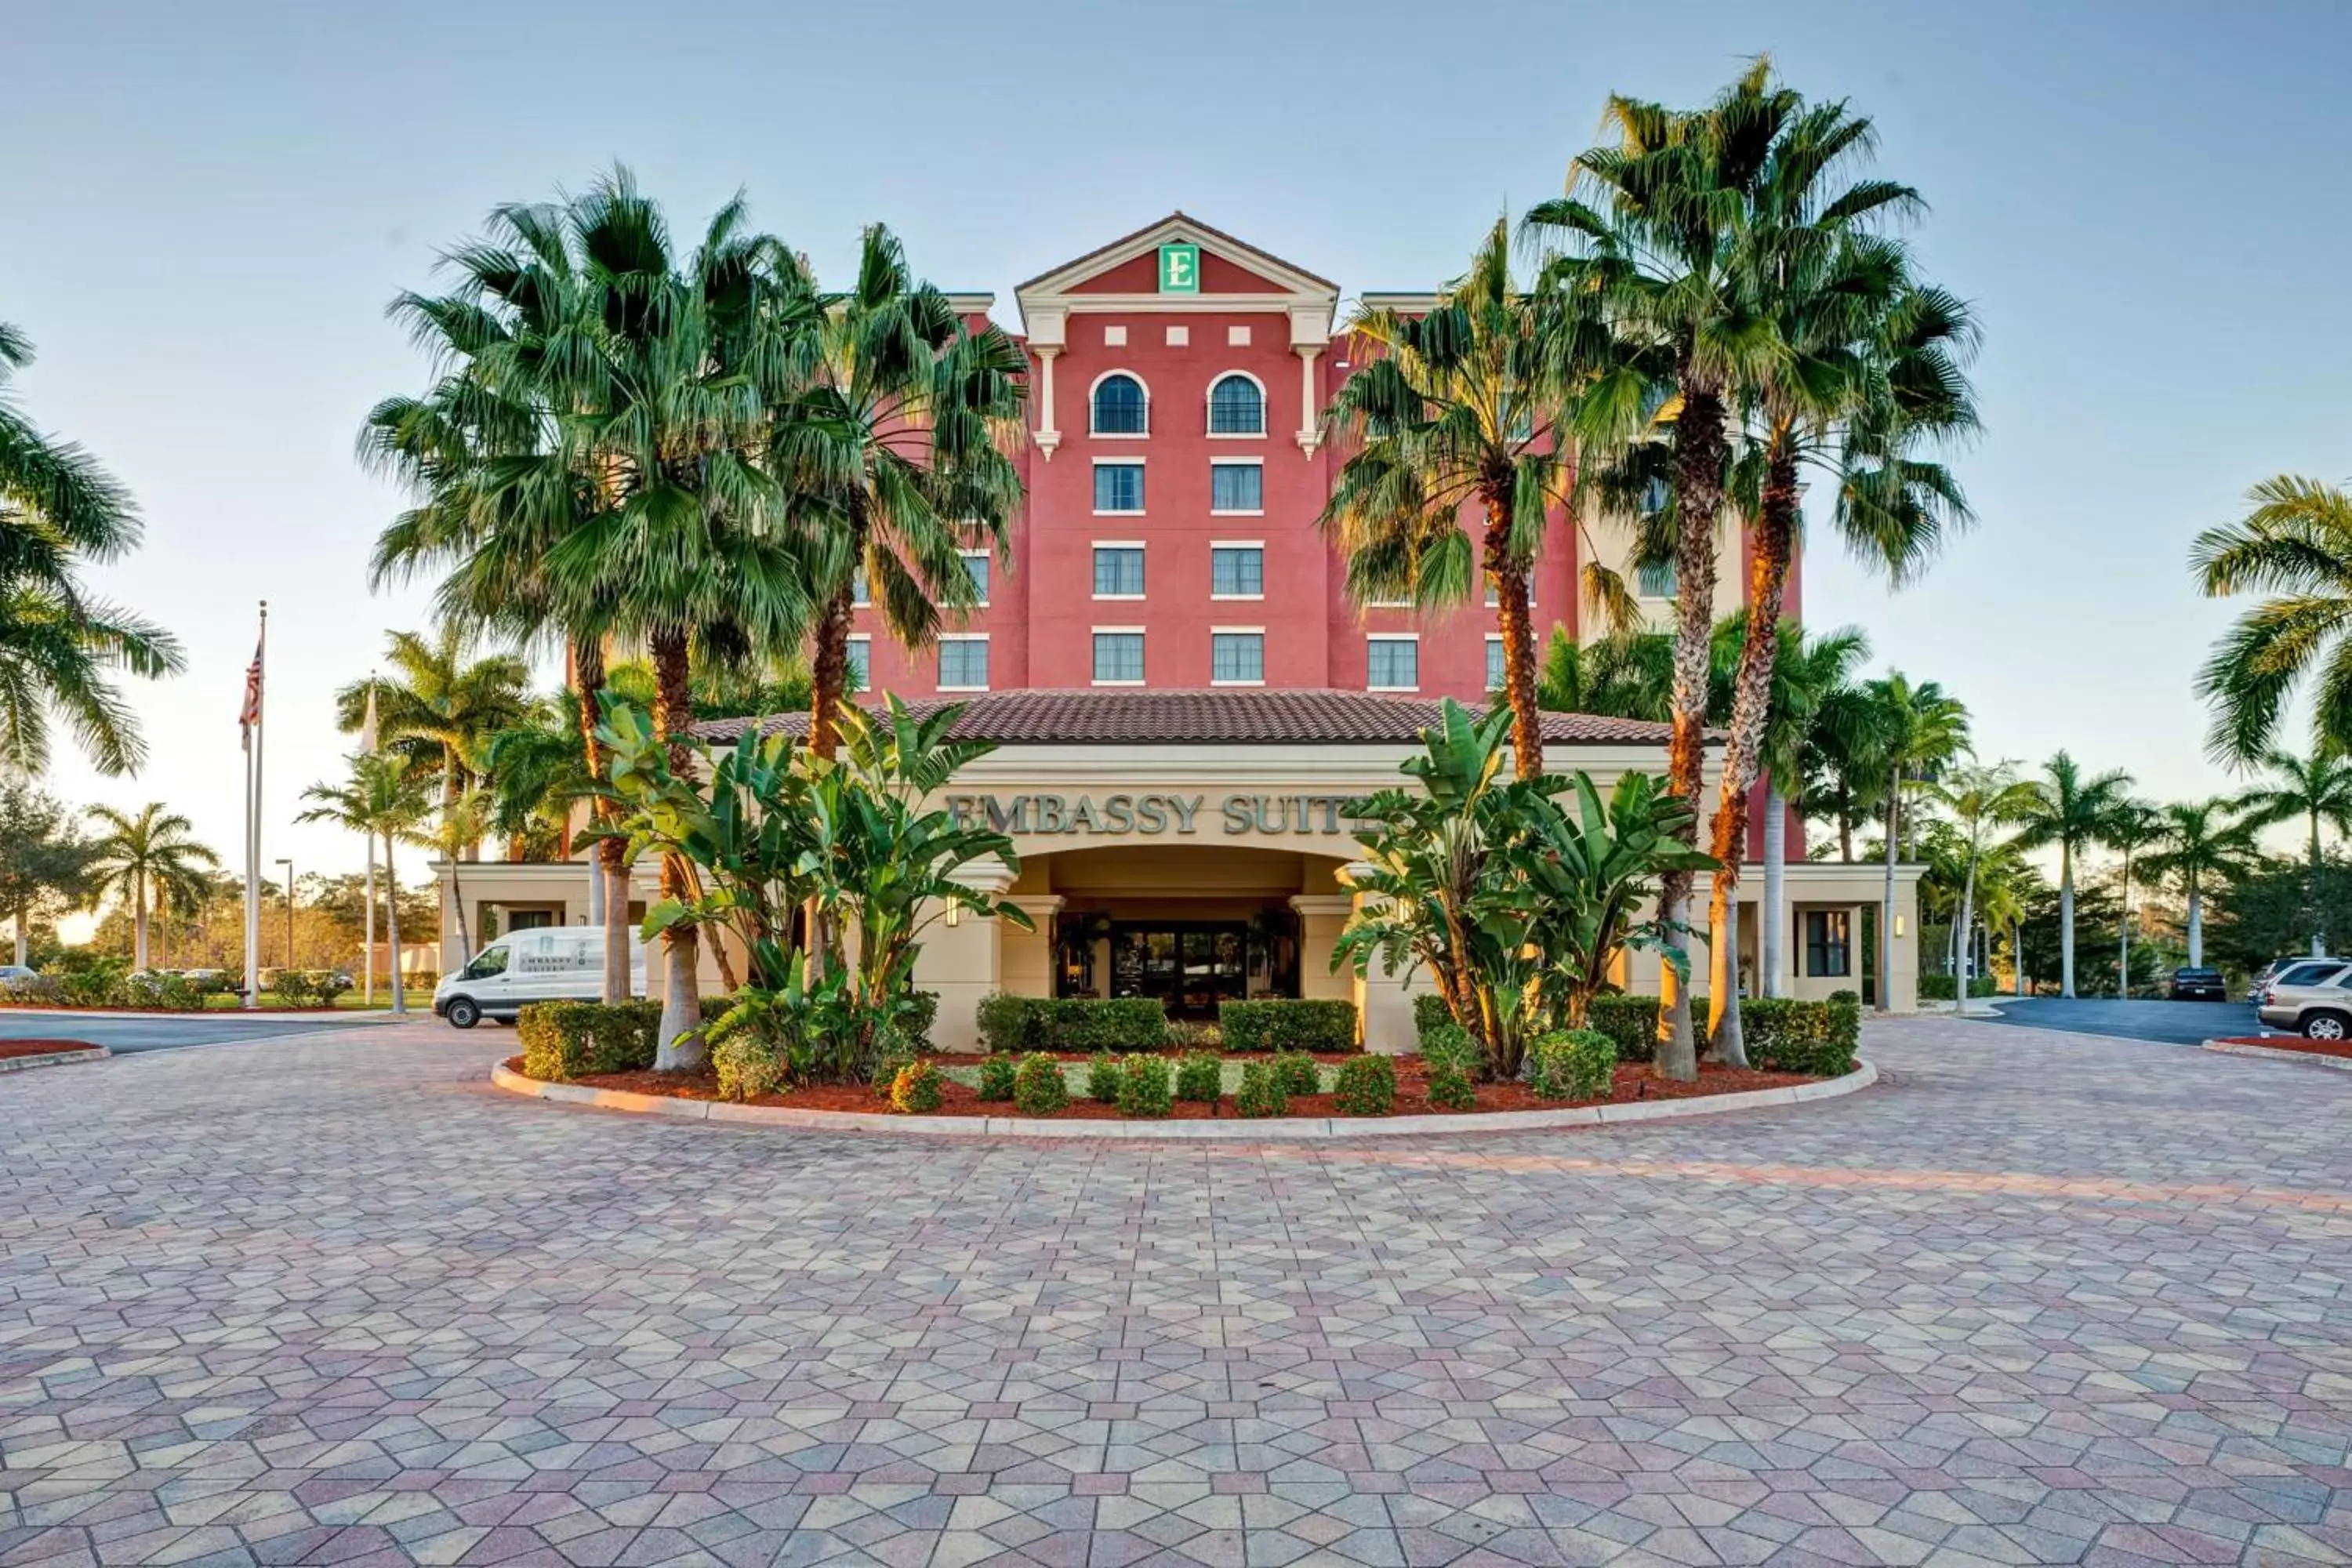 Property Building in Embassy Suites Fort Myers - Estero